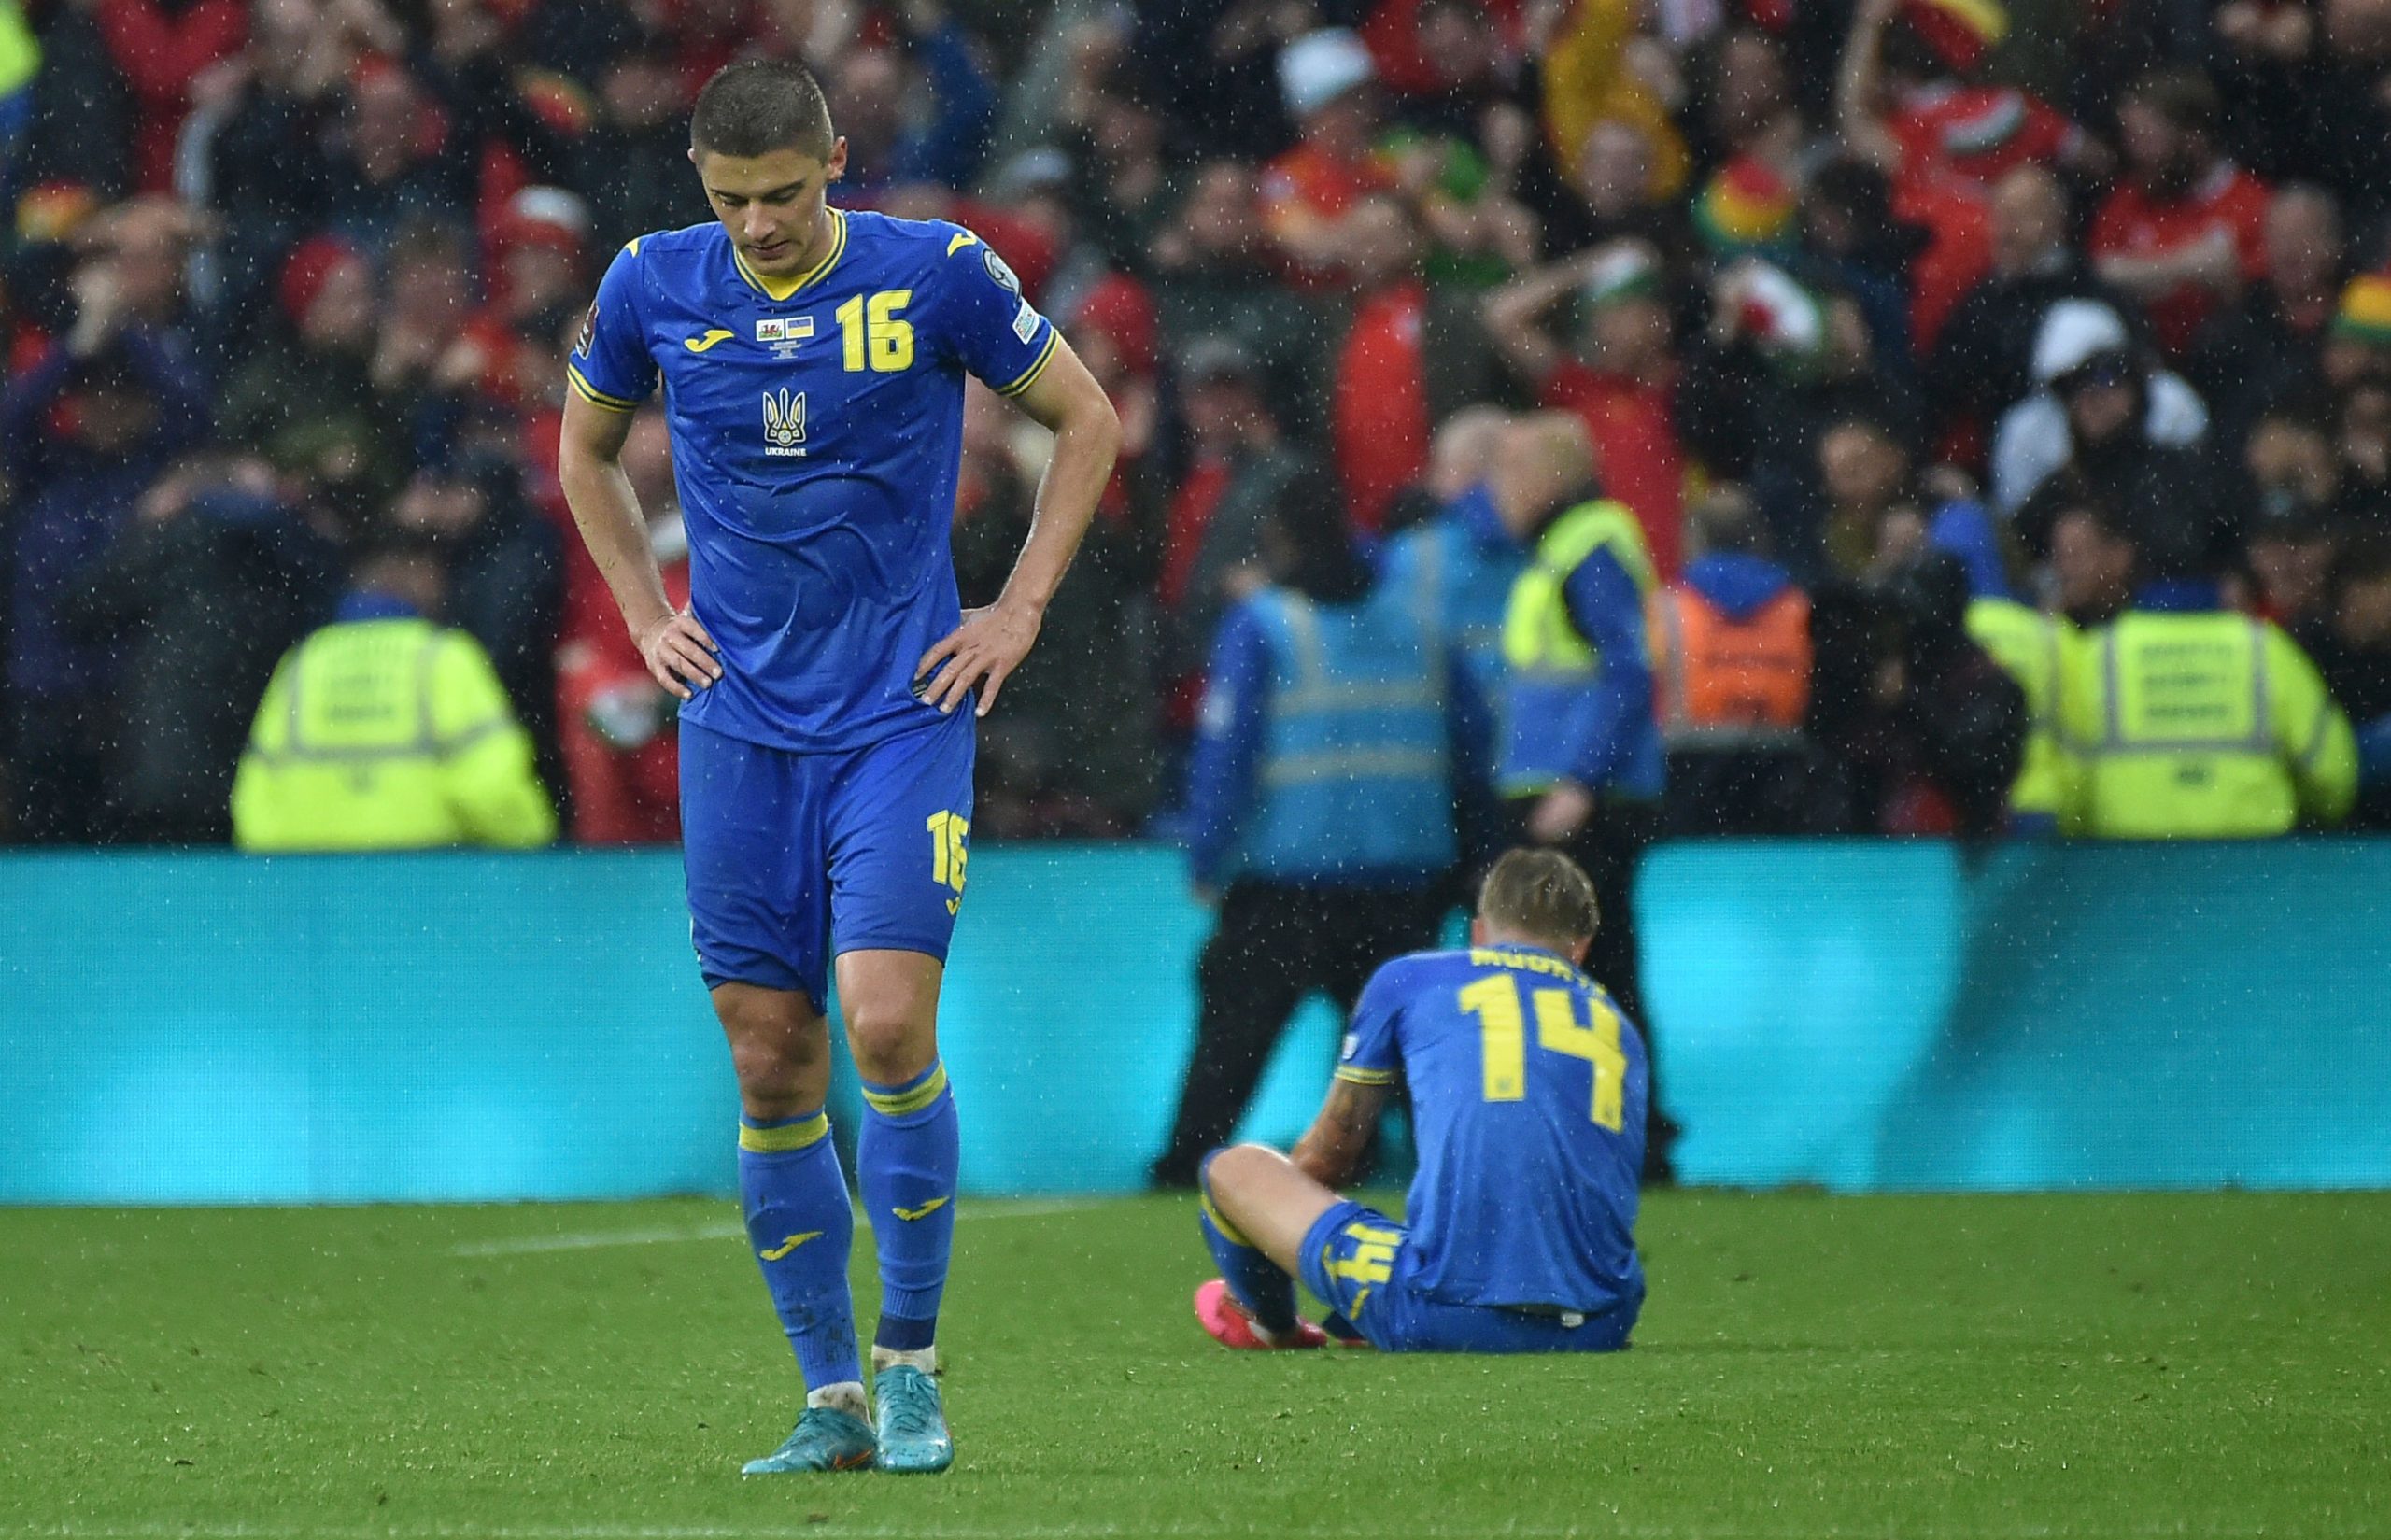 War-torn Ukraine lose 1-0 to Wales, who head to first World Cup in 64 years